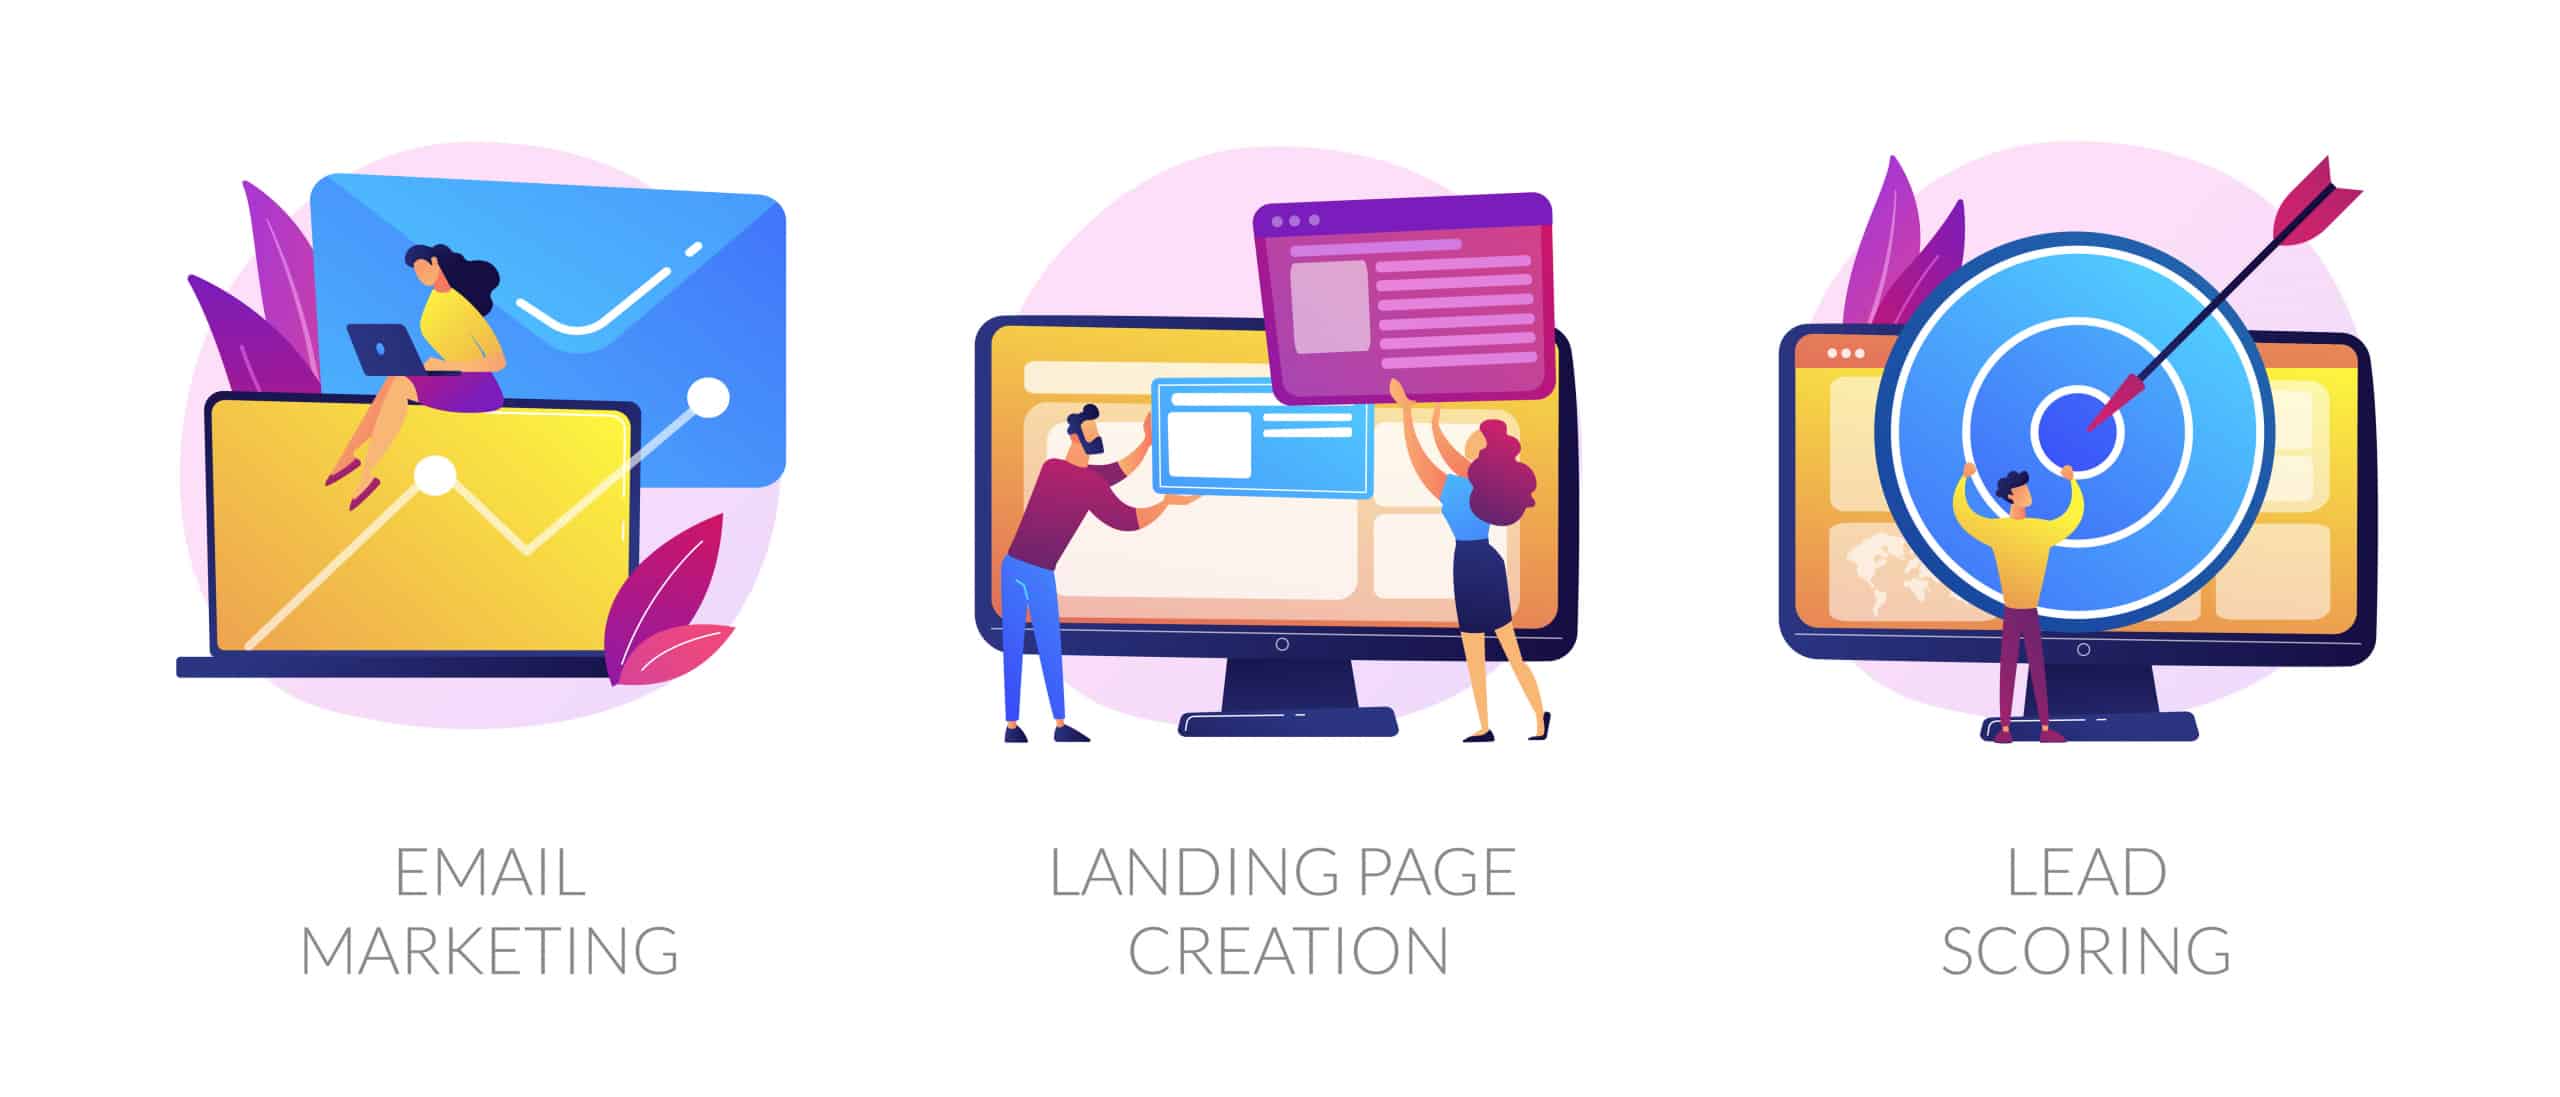 Email marketing, landing page creation, and lead scoring illustrations